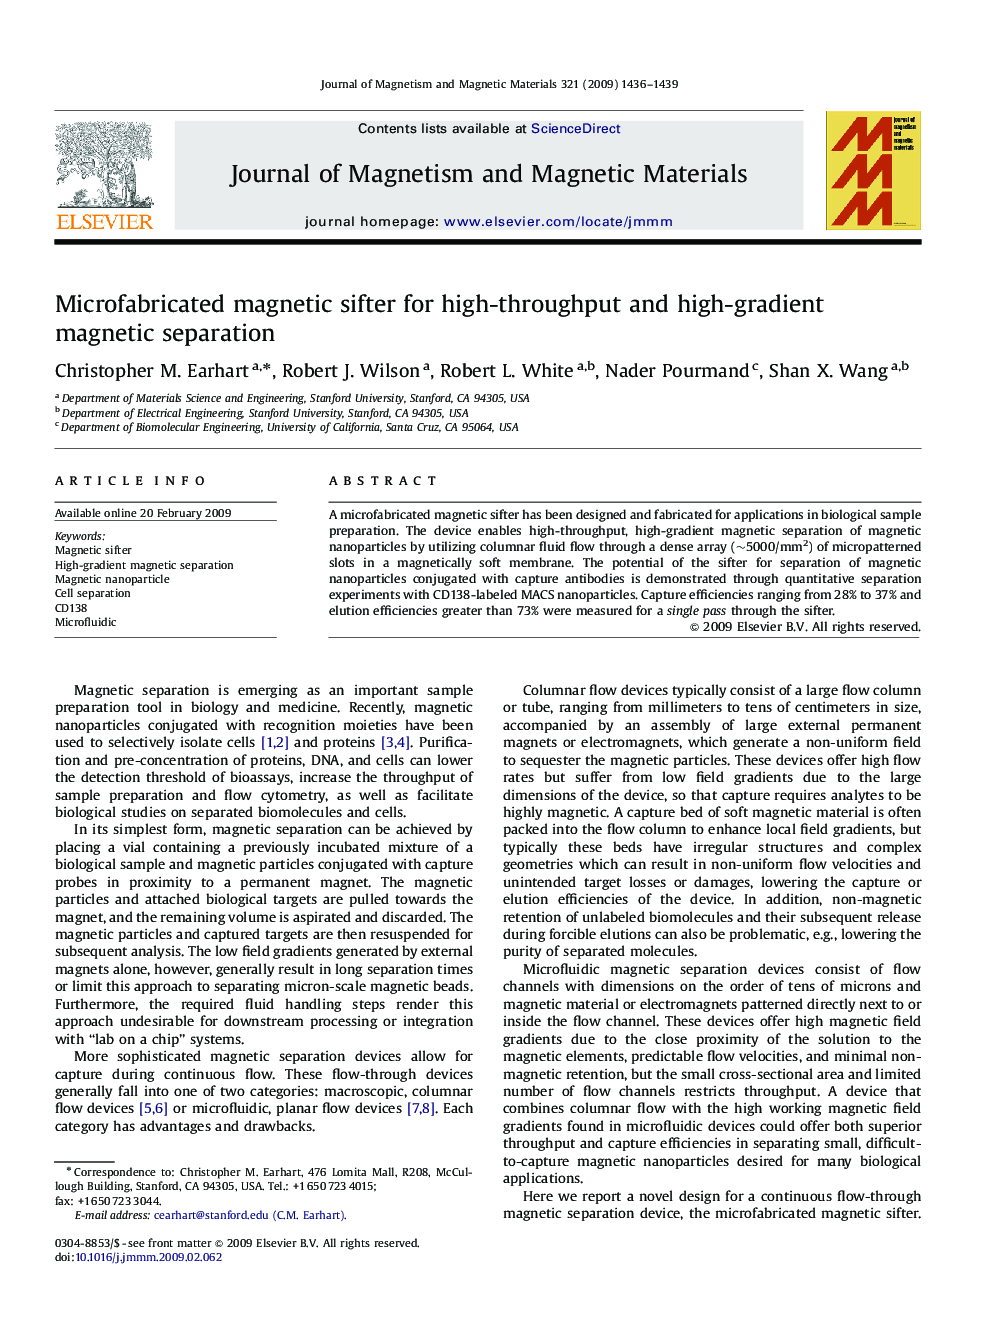 Microfabricated magnetic sifter for high-throughput and high-gradient magnetic separation